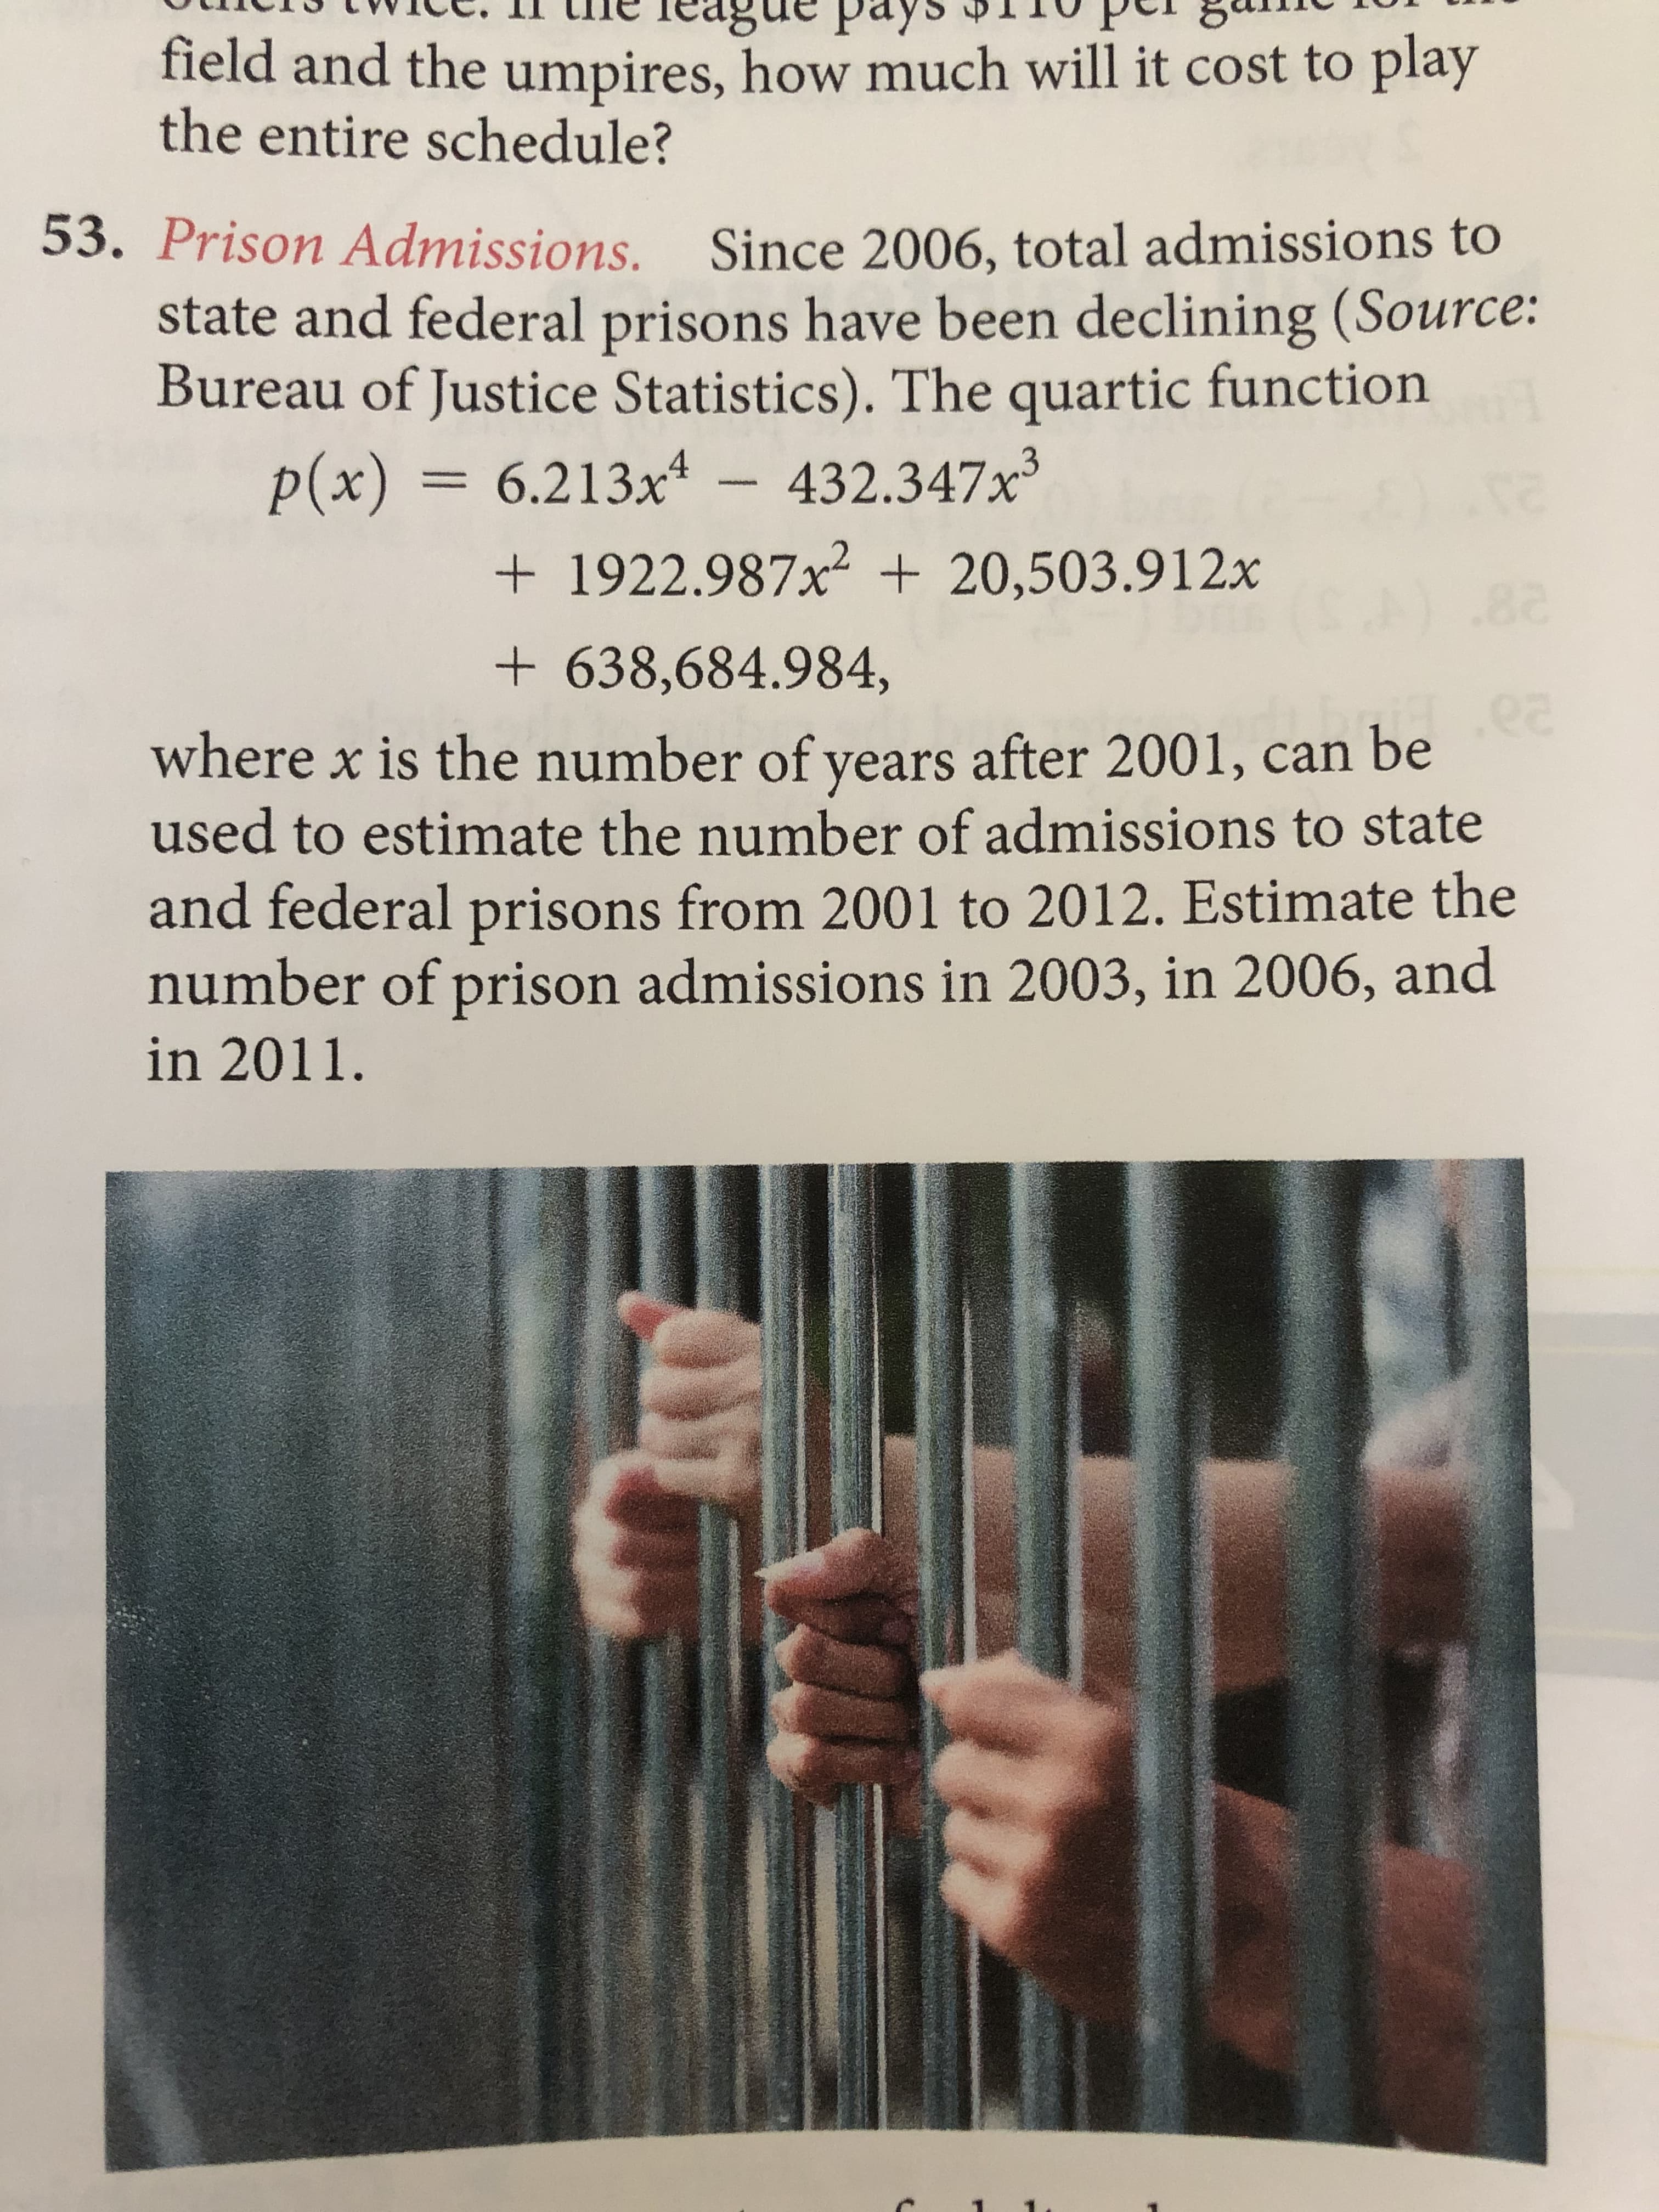 Prison Admissions. Since 2006, total admissions to
state and federal prisons have been declining (Source:
Bureau of Justice Statistics). The quartic function
p(x) = 6.213x*
432.347x3
%3D
